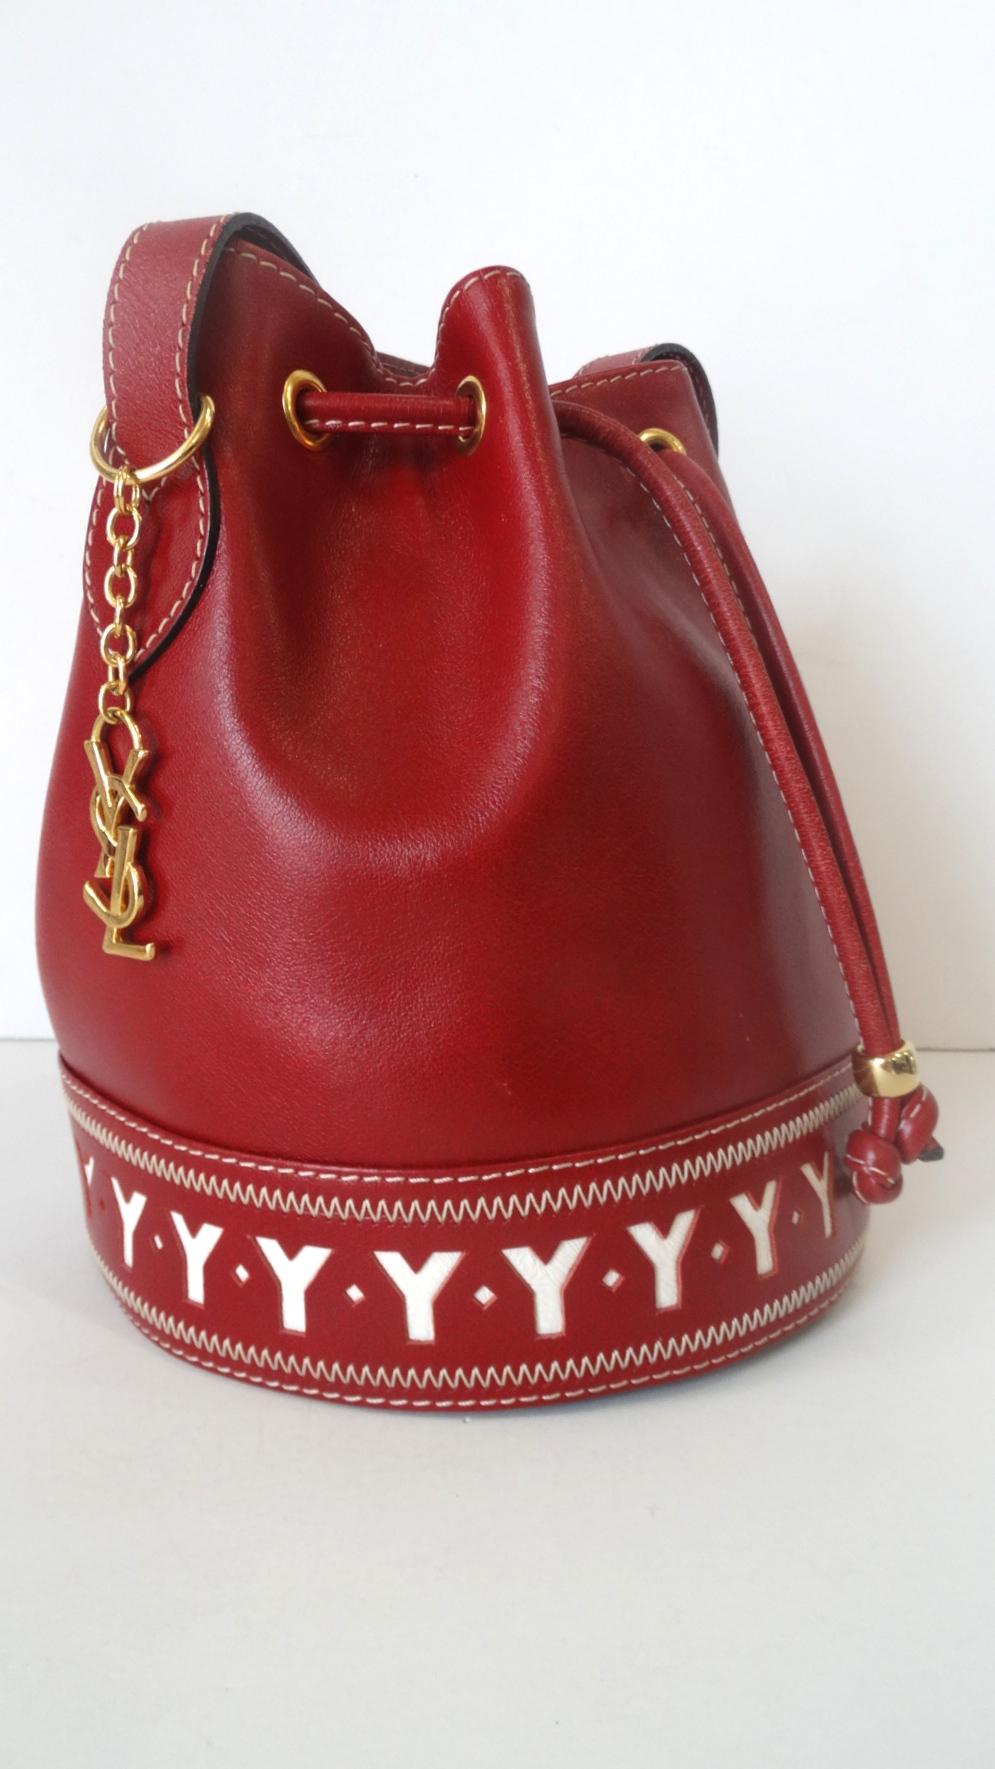 The Most Adorable Bag Is Here! Circa 1980s, this Yves Saint Laurent bucket bag is made of soft lipstick red pebble leather and features gold plated hardware. Includes contrasting white trim stitching and an adjustable belt style shoulder strap. The